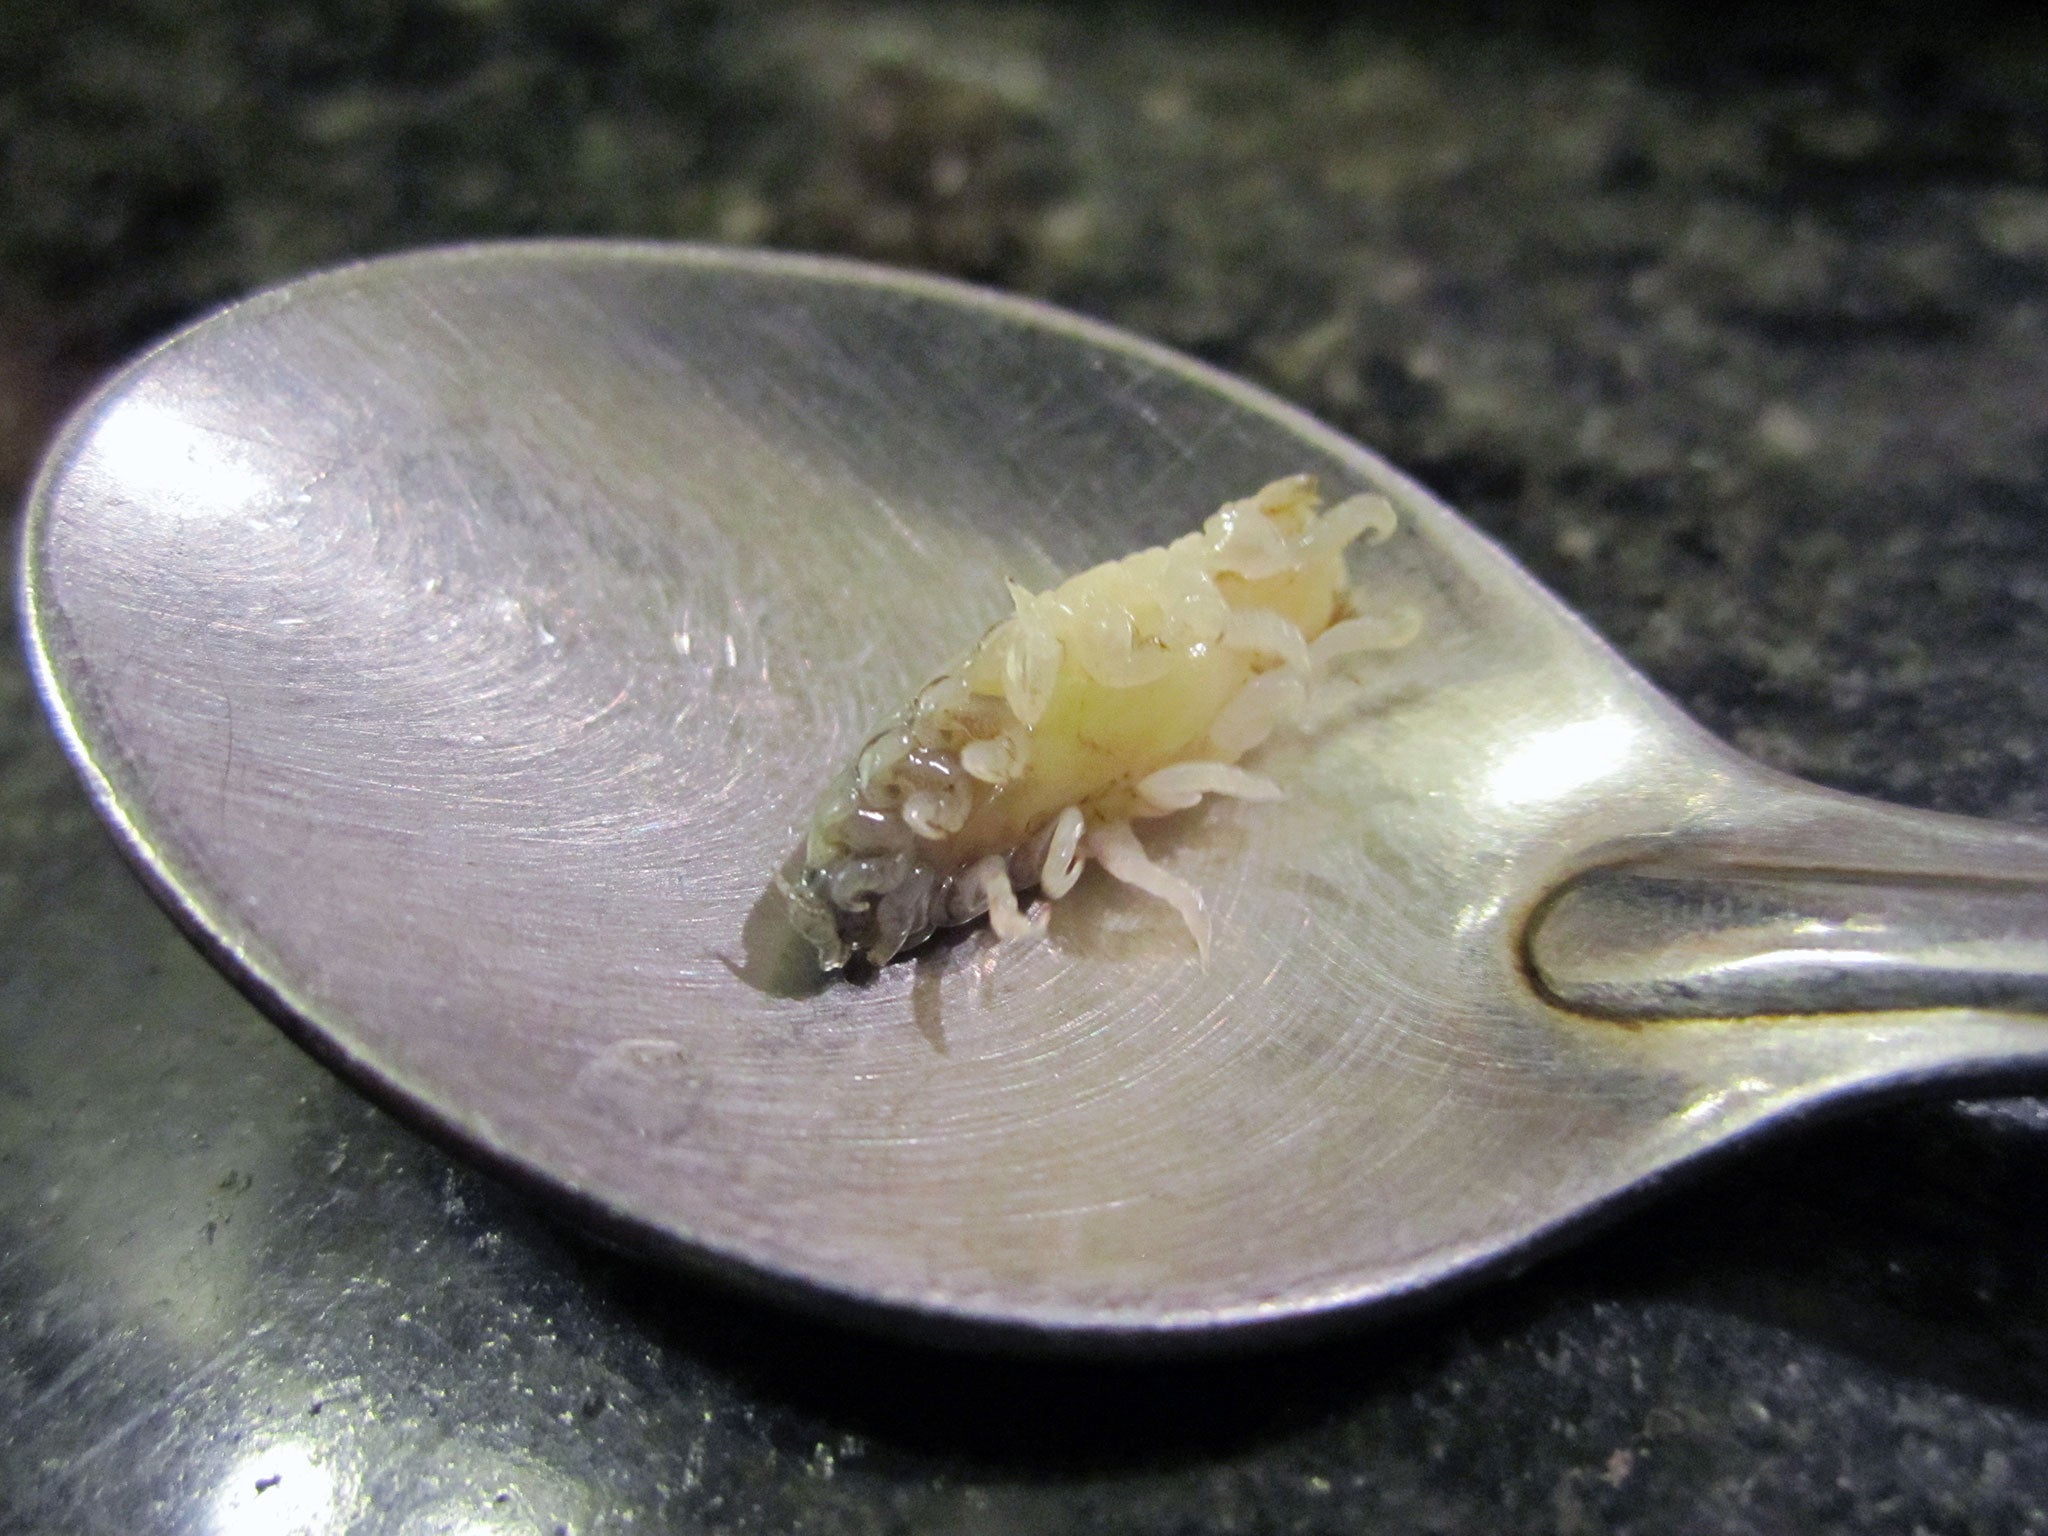 Man finds tongue-eating parasite in his Morrisons fish | The Independent2048 x 1536